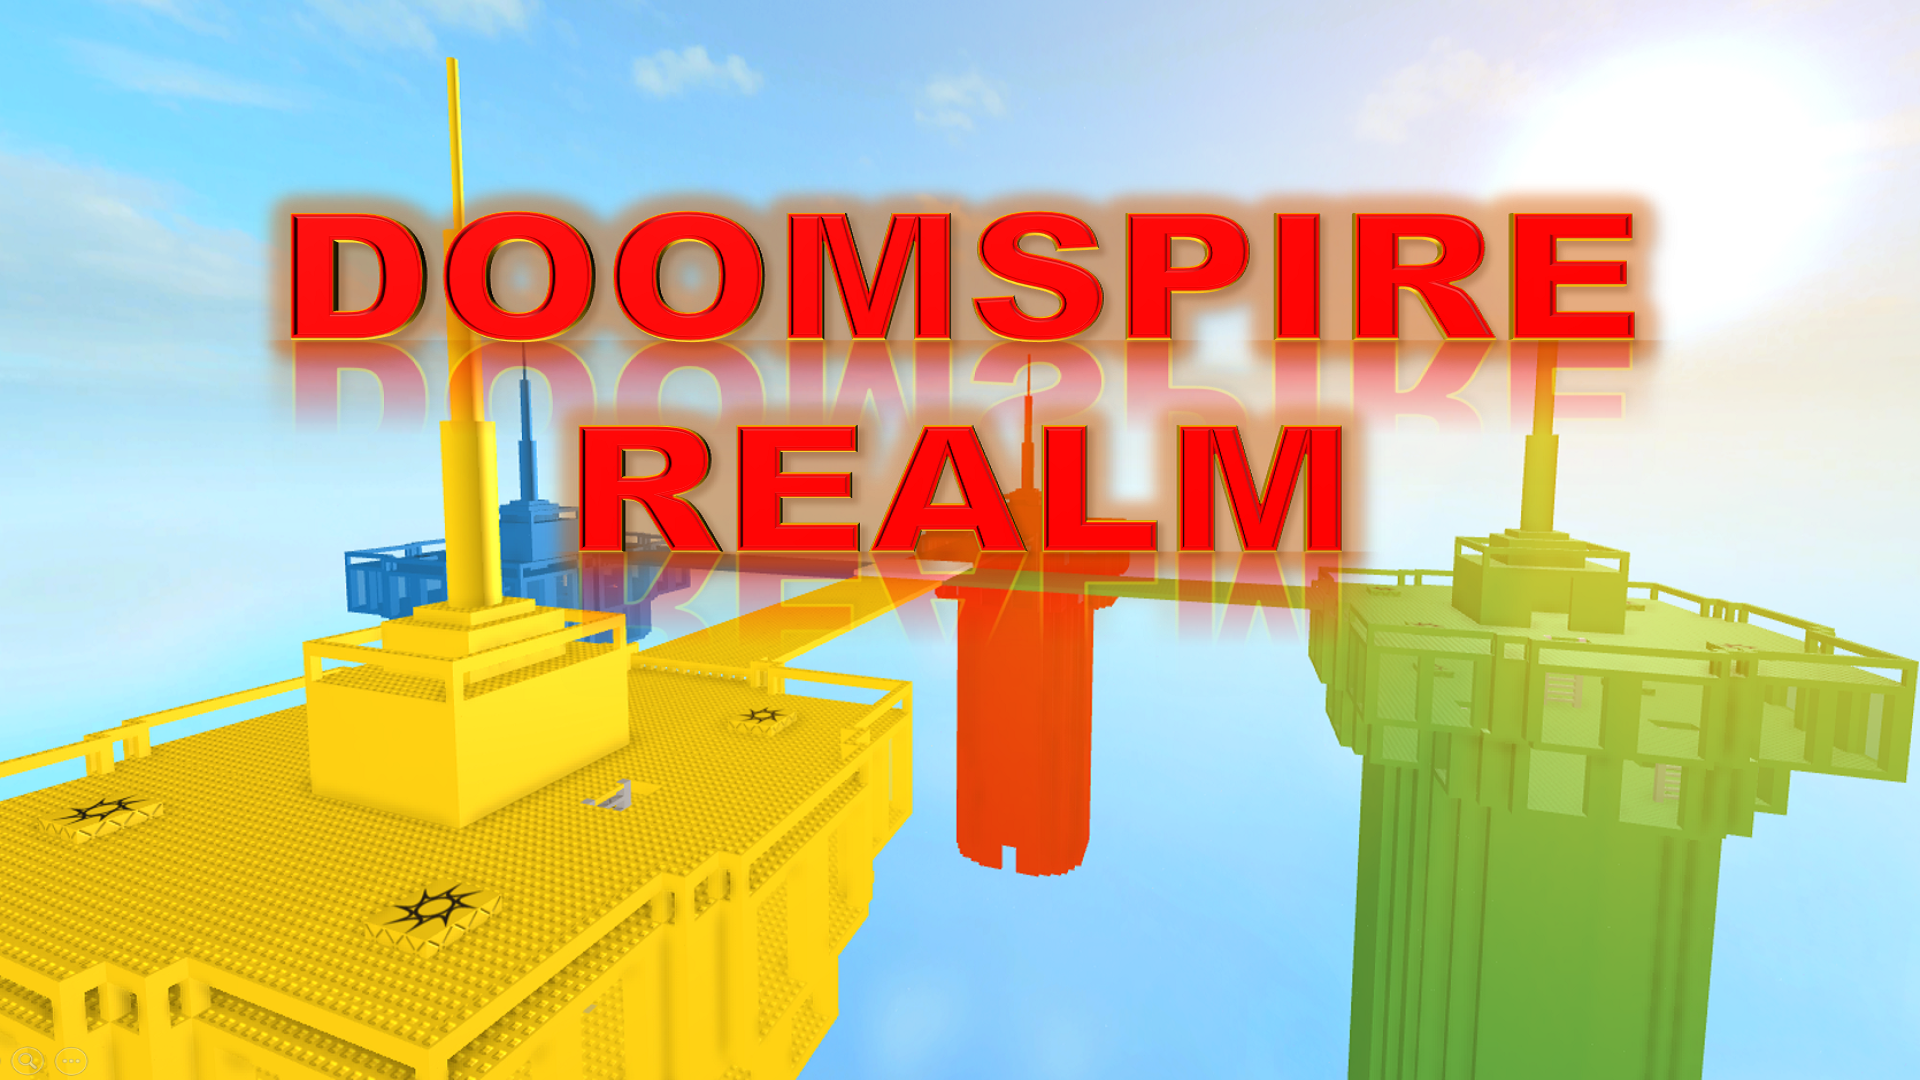 Doomspire Realm Community Safety Association Roblox Fandom - at the temple of brickbattle roblox